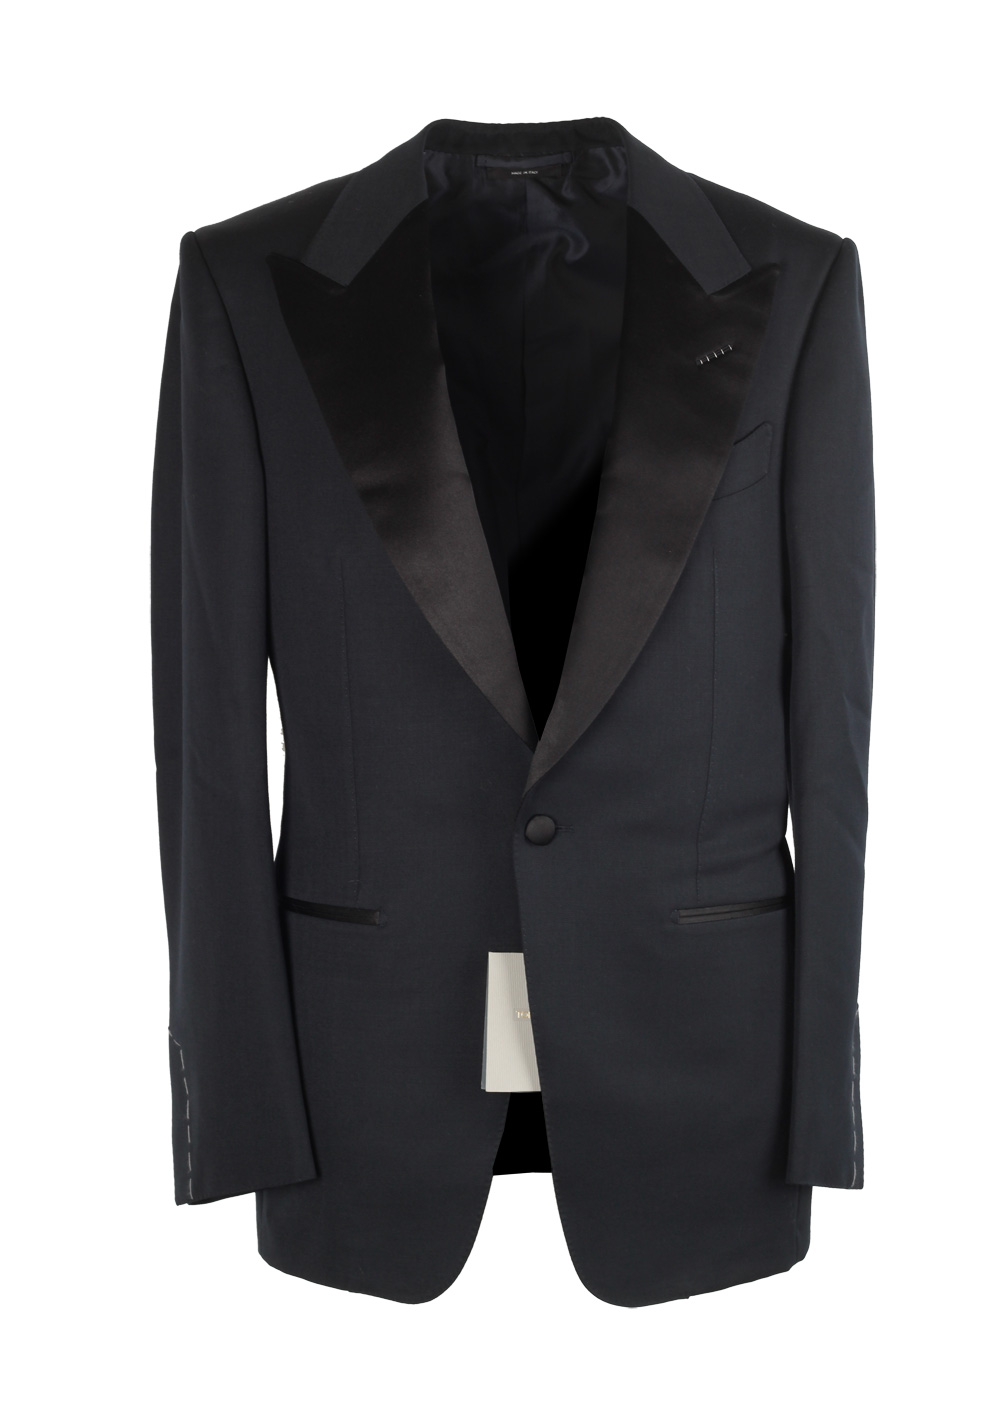 TOM FORD Windsor Black Tuxedo Suit Smoking Size 48 / 38R U.S. Fit A ...